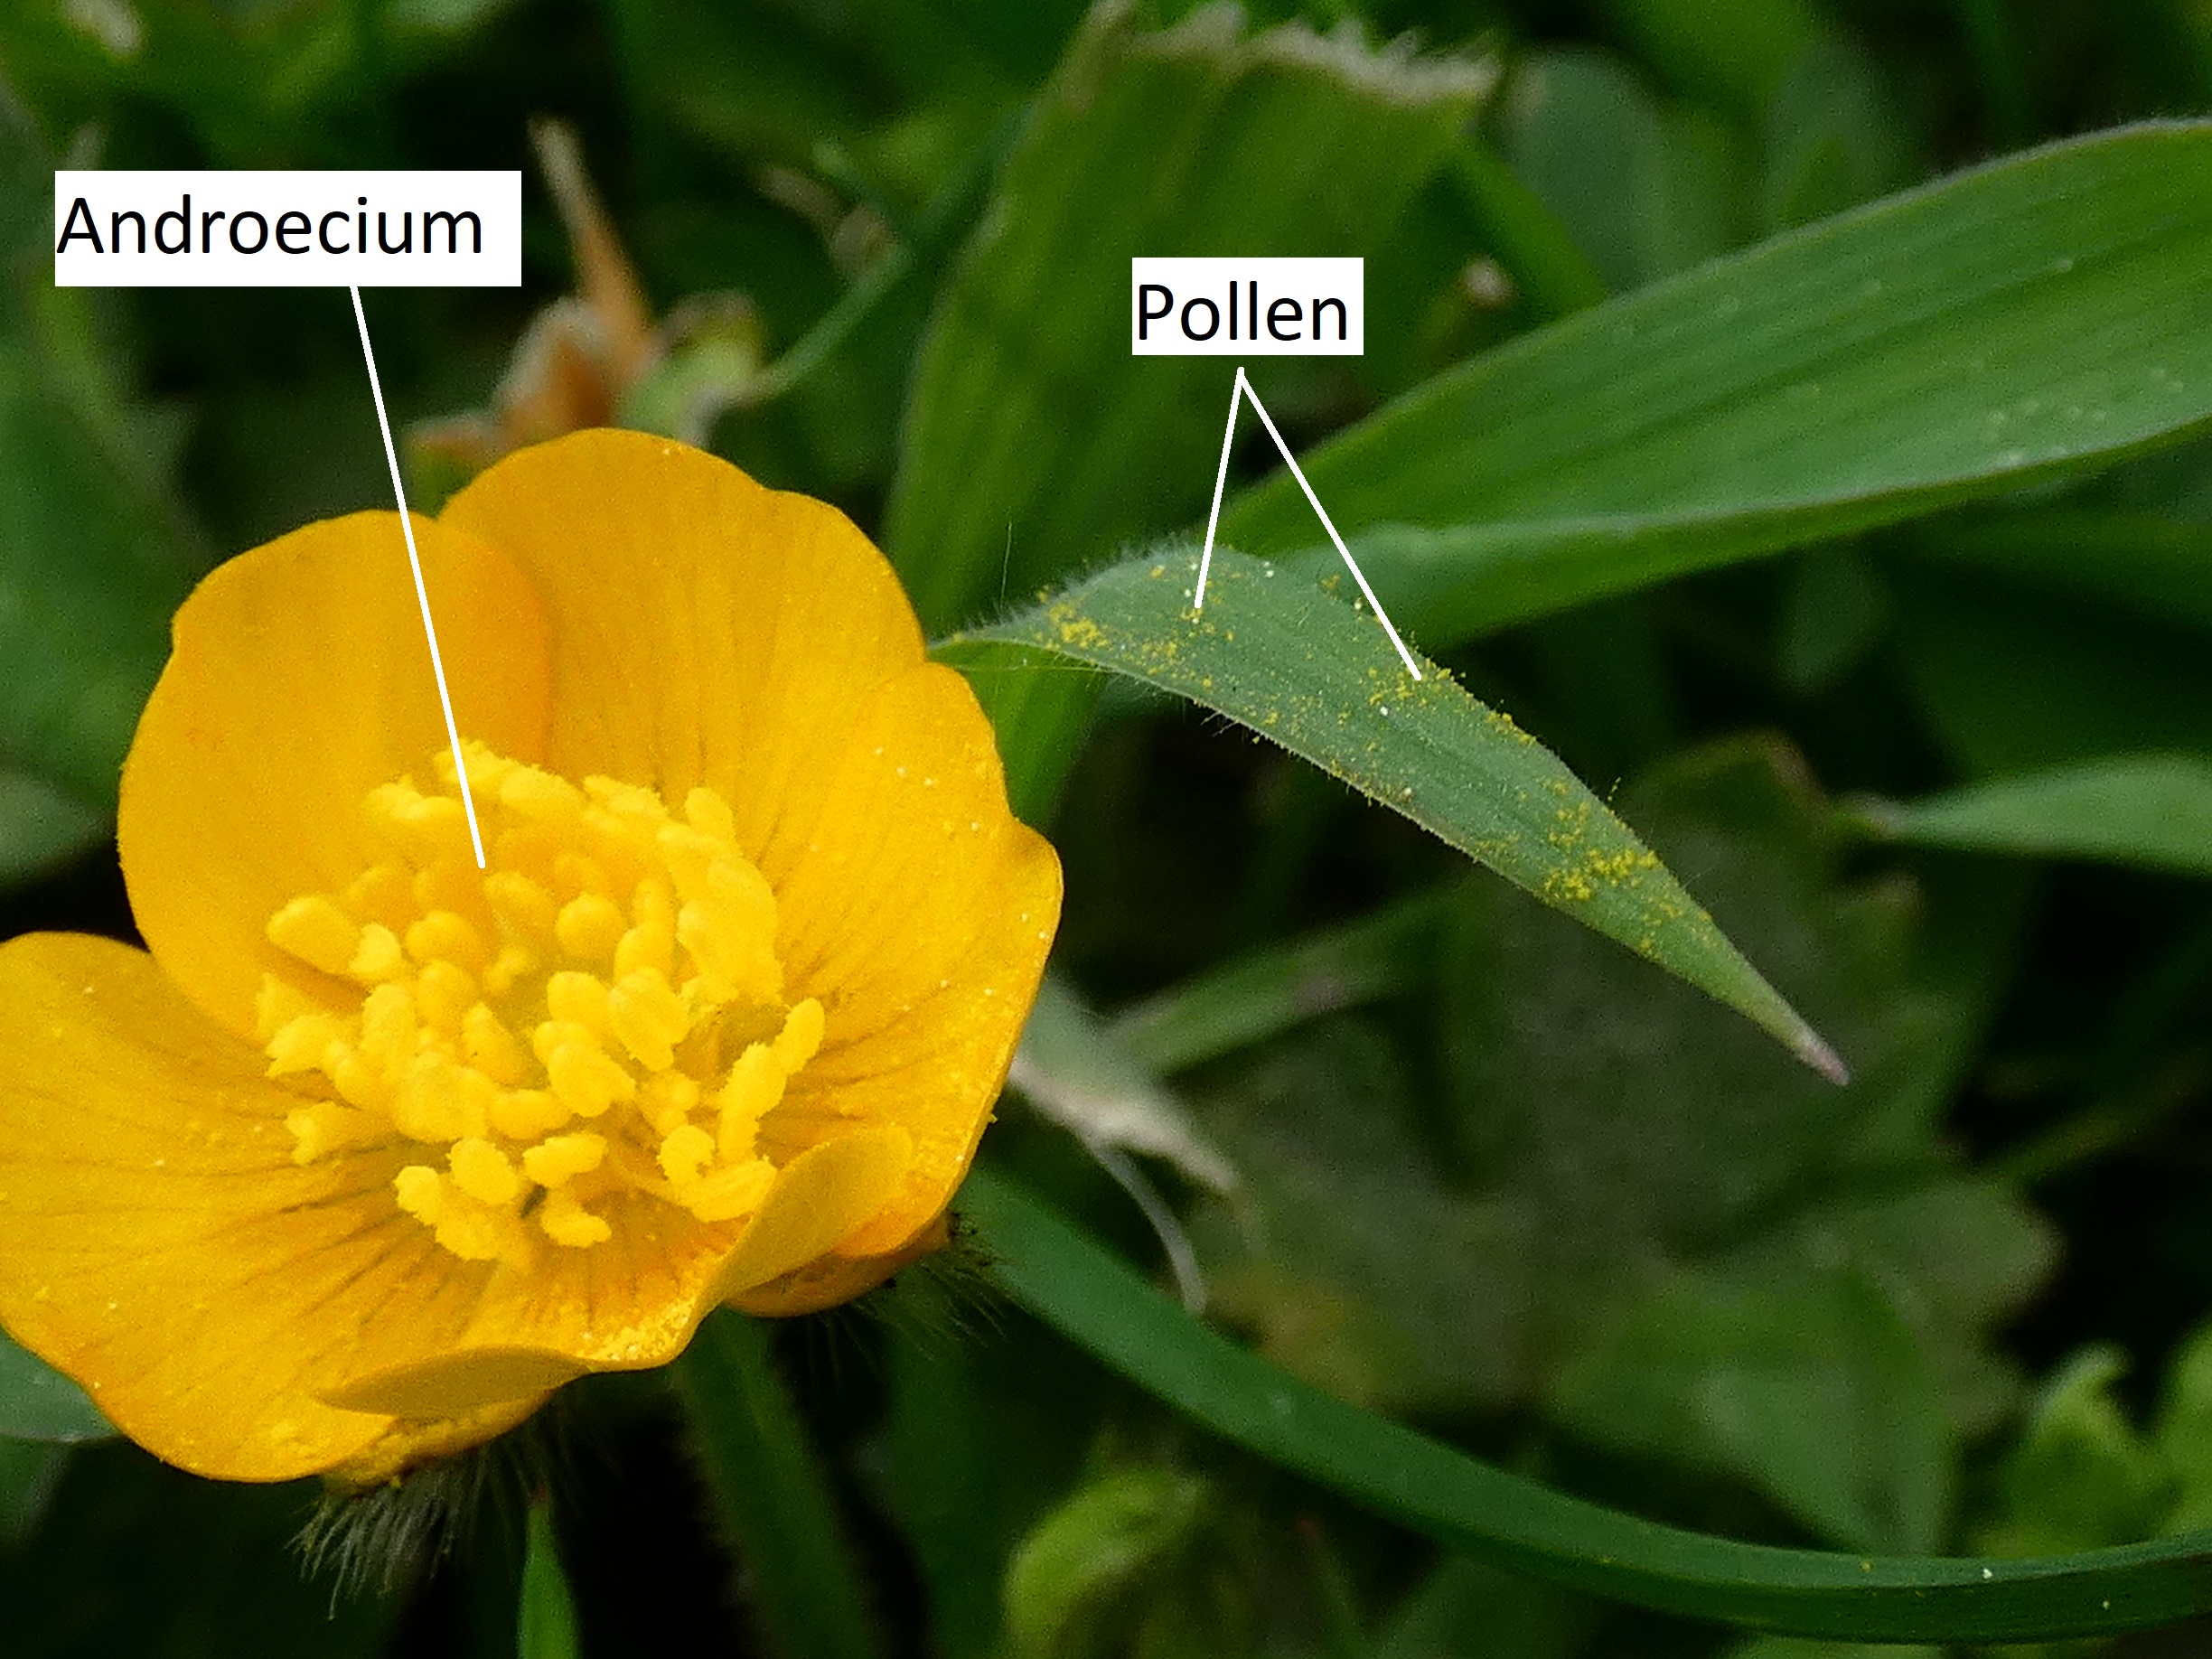 A buttercup with many stamens that has dispersed pollen on a nearby blade of grass